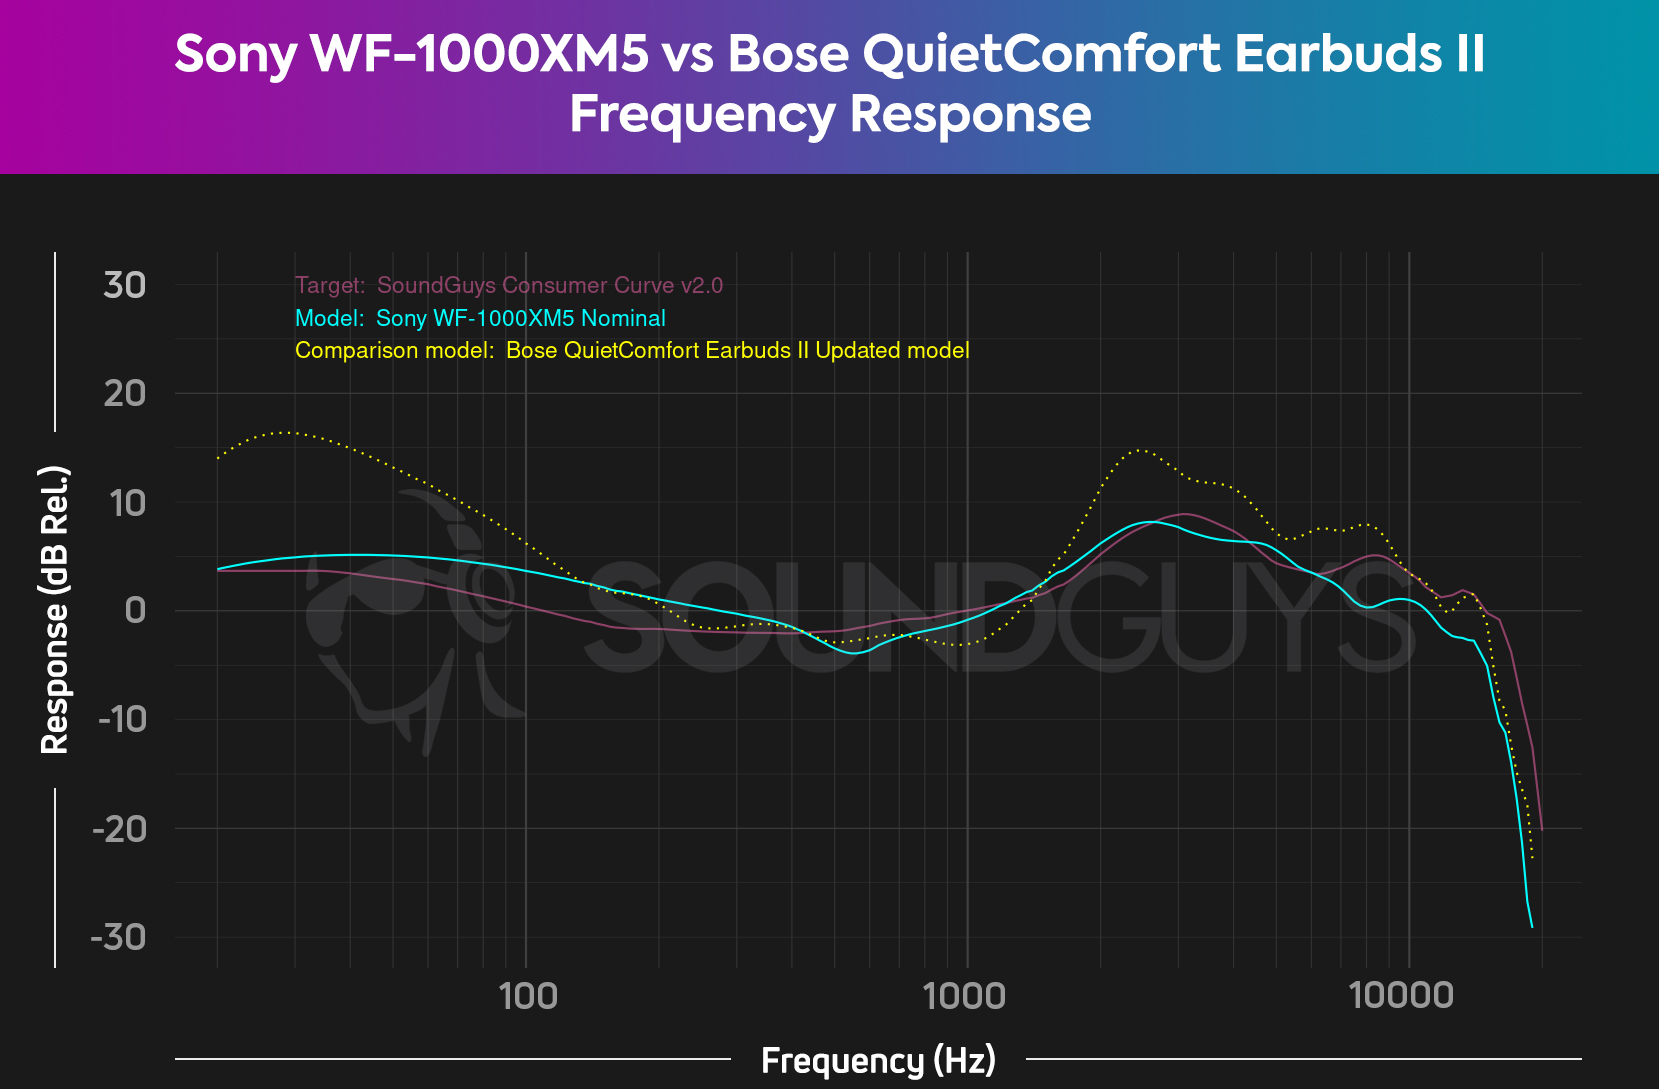 The frequency response comparison between the Sony WF-1000XM5 and the Bose QuietComfort Earbuds II, showing slightly more bass on the Bose earbuds.